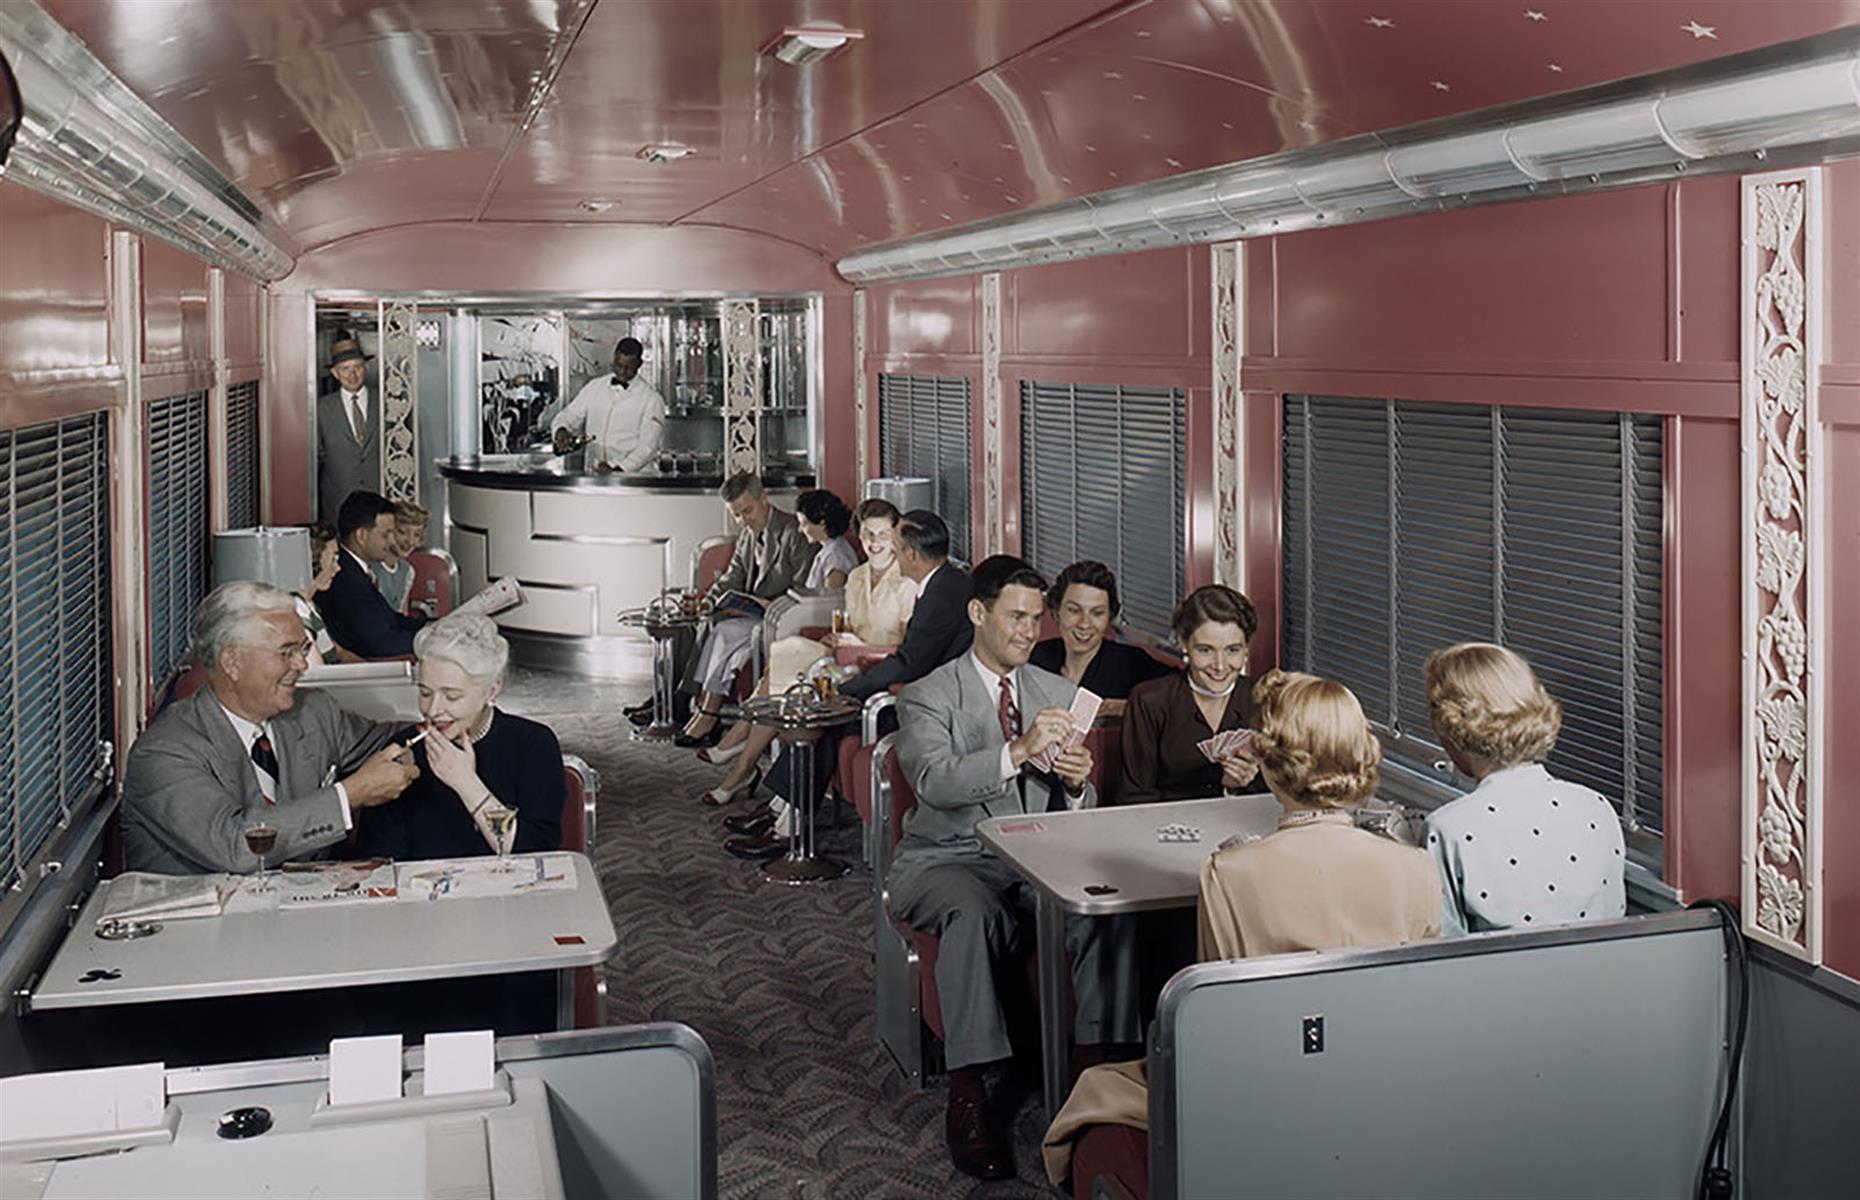 Operated by the Southern Pacific Railroad, Sunset Limited was a route connecting New Orleans with Los Angeles. The oldest named train in the US, Sunset Limited started operations in 1894 and, having opened 20 years before the Panama Canal, offered a quicker connection between the East and West Coasts. Here, travelers are seen passing the time in one of the two lounge cars in the 1950s.